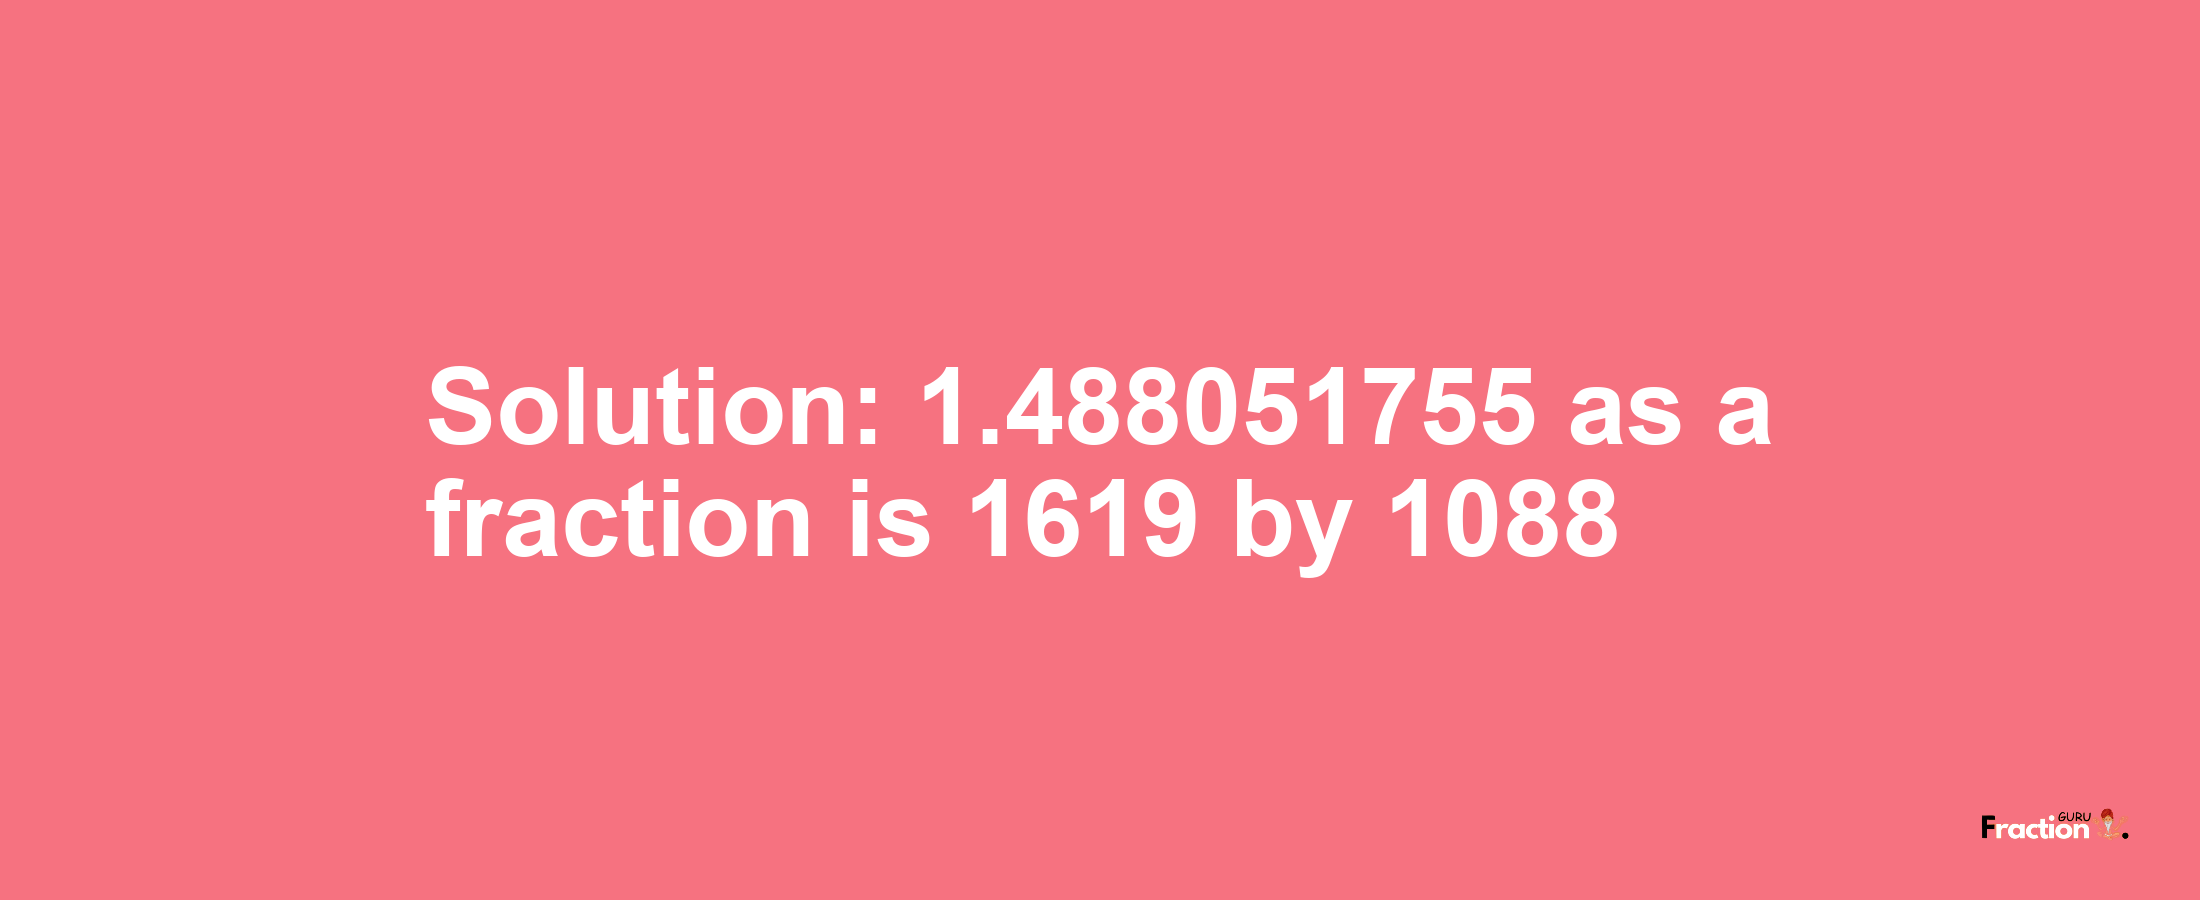 Solution:1.488051755 as a fraction is 1619/1088